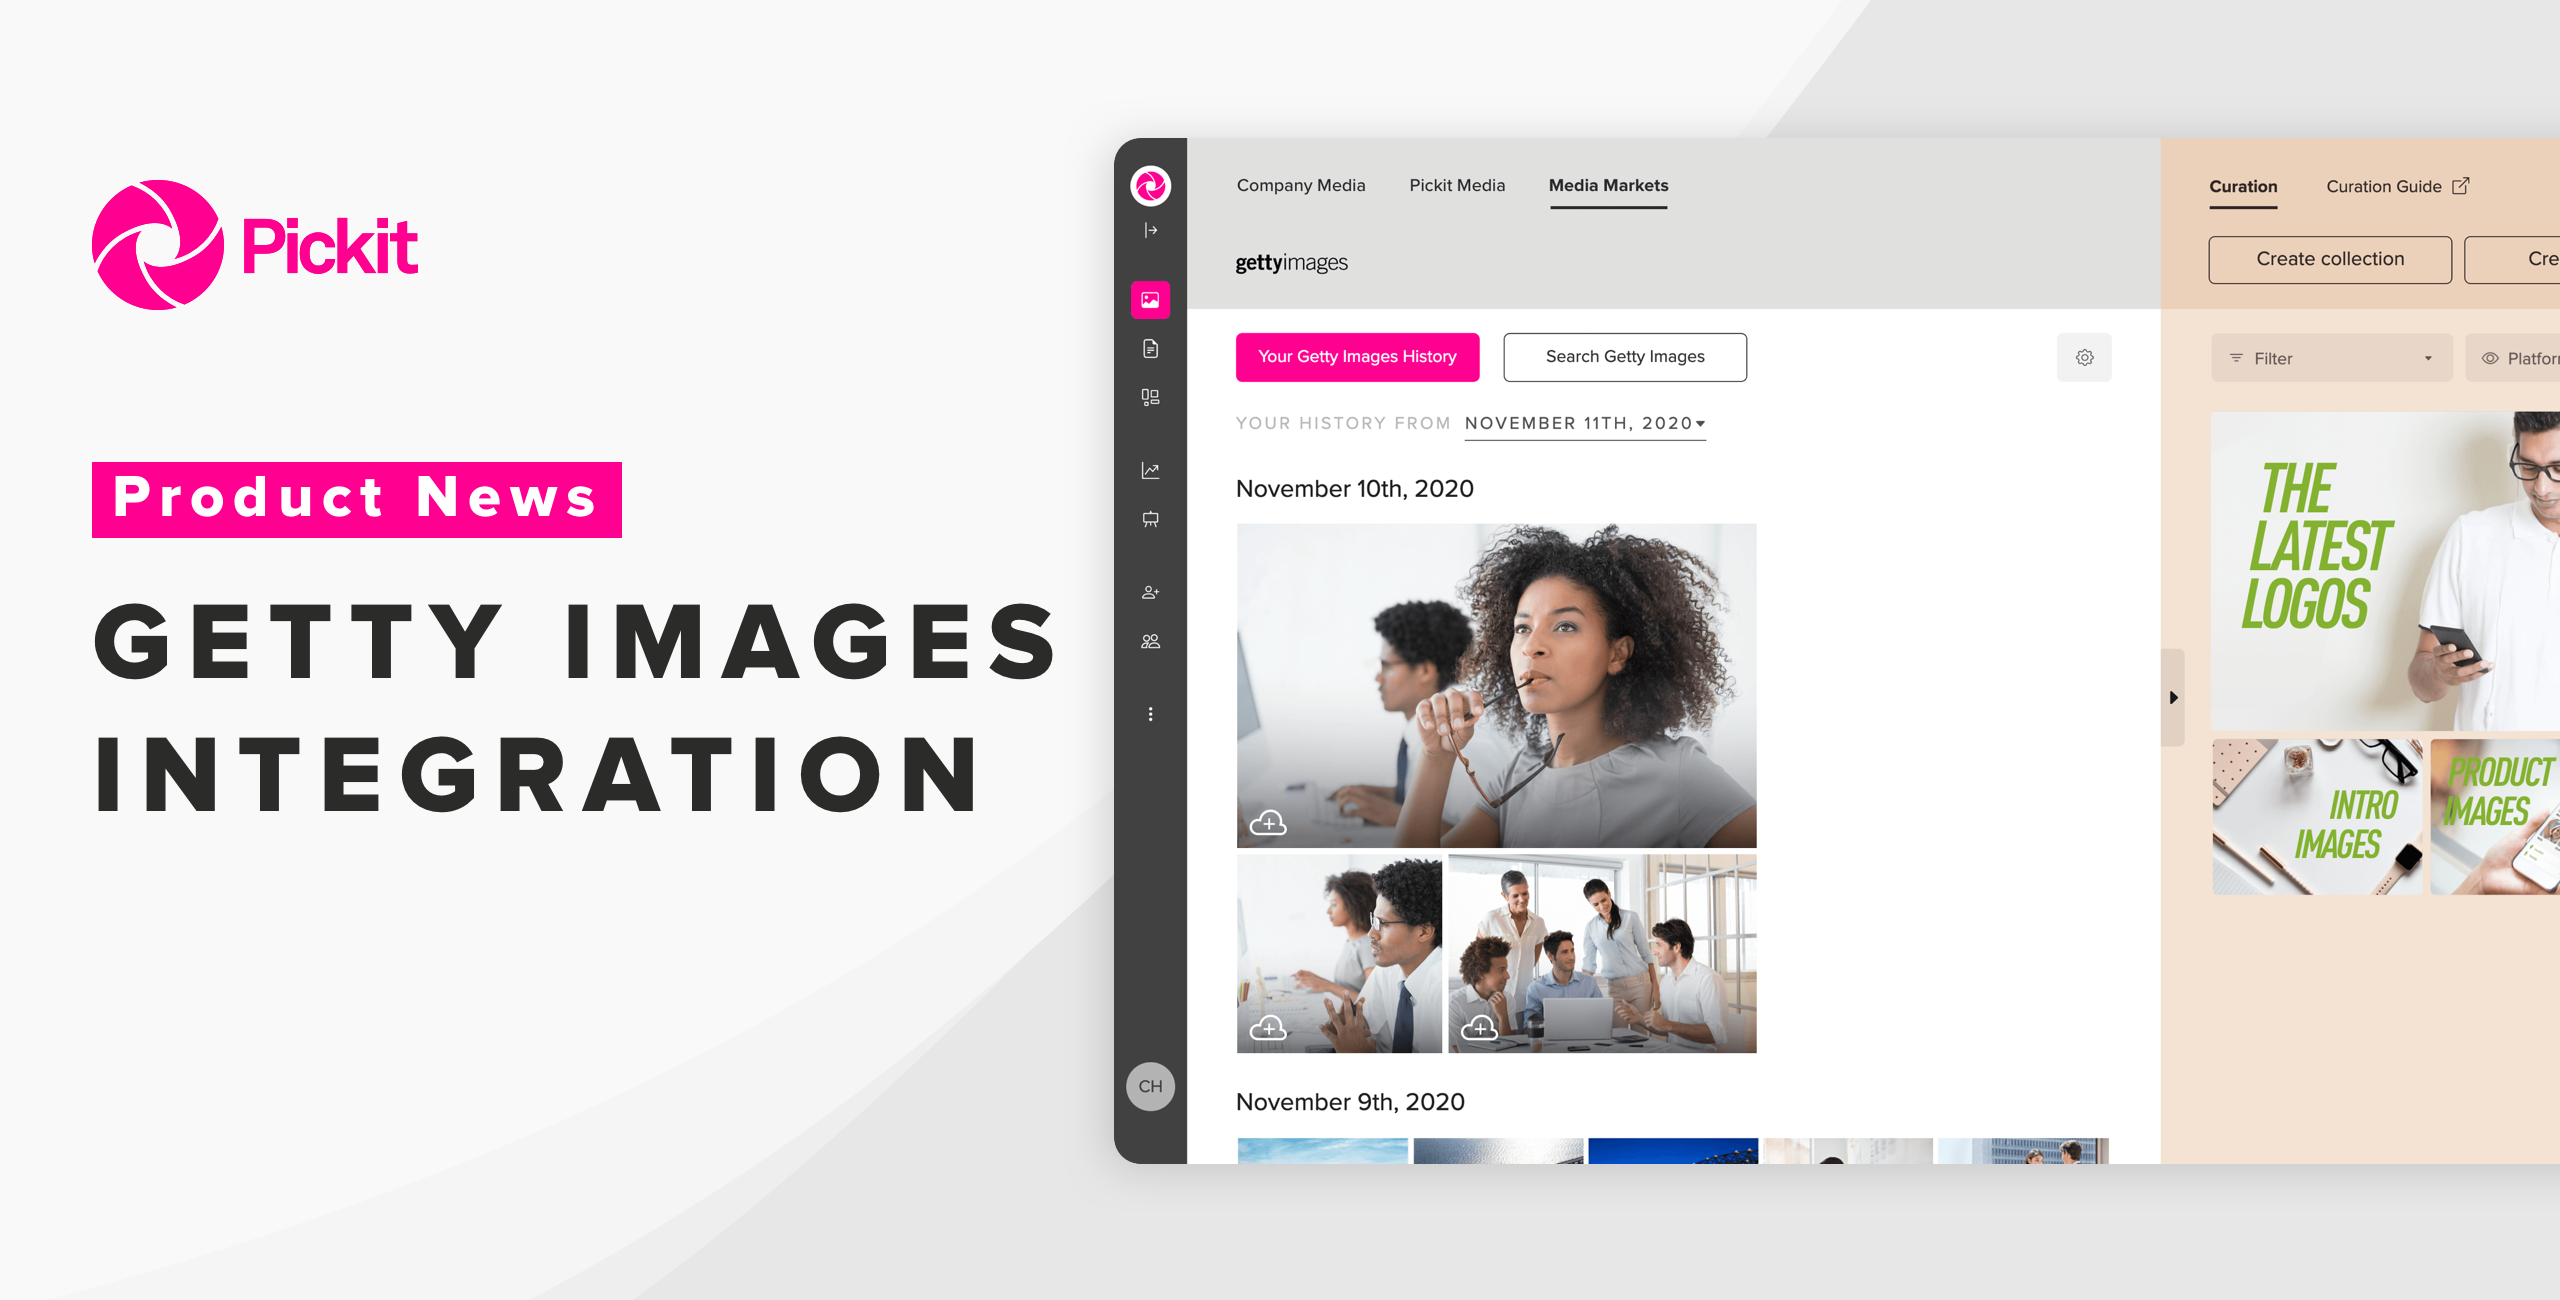 Pickit announces new integration and partnership with Getty Images